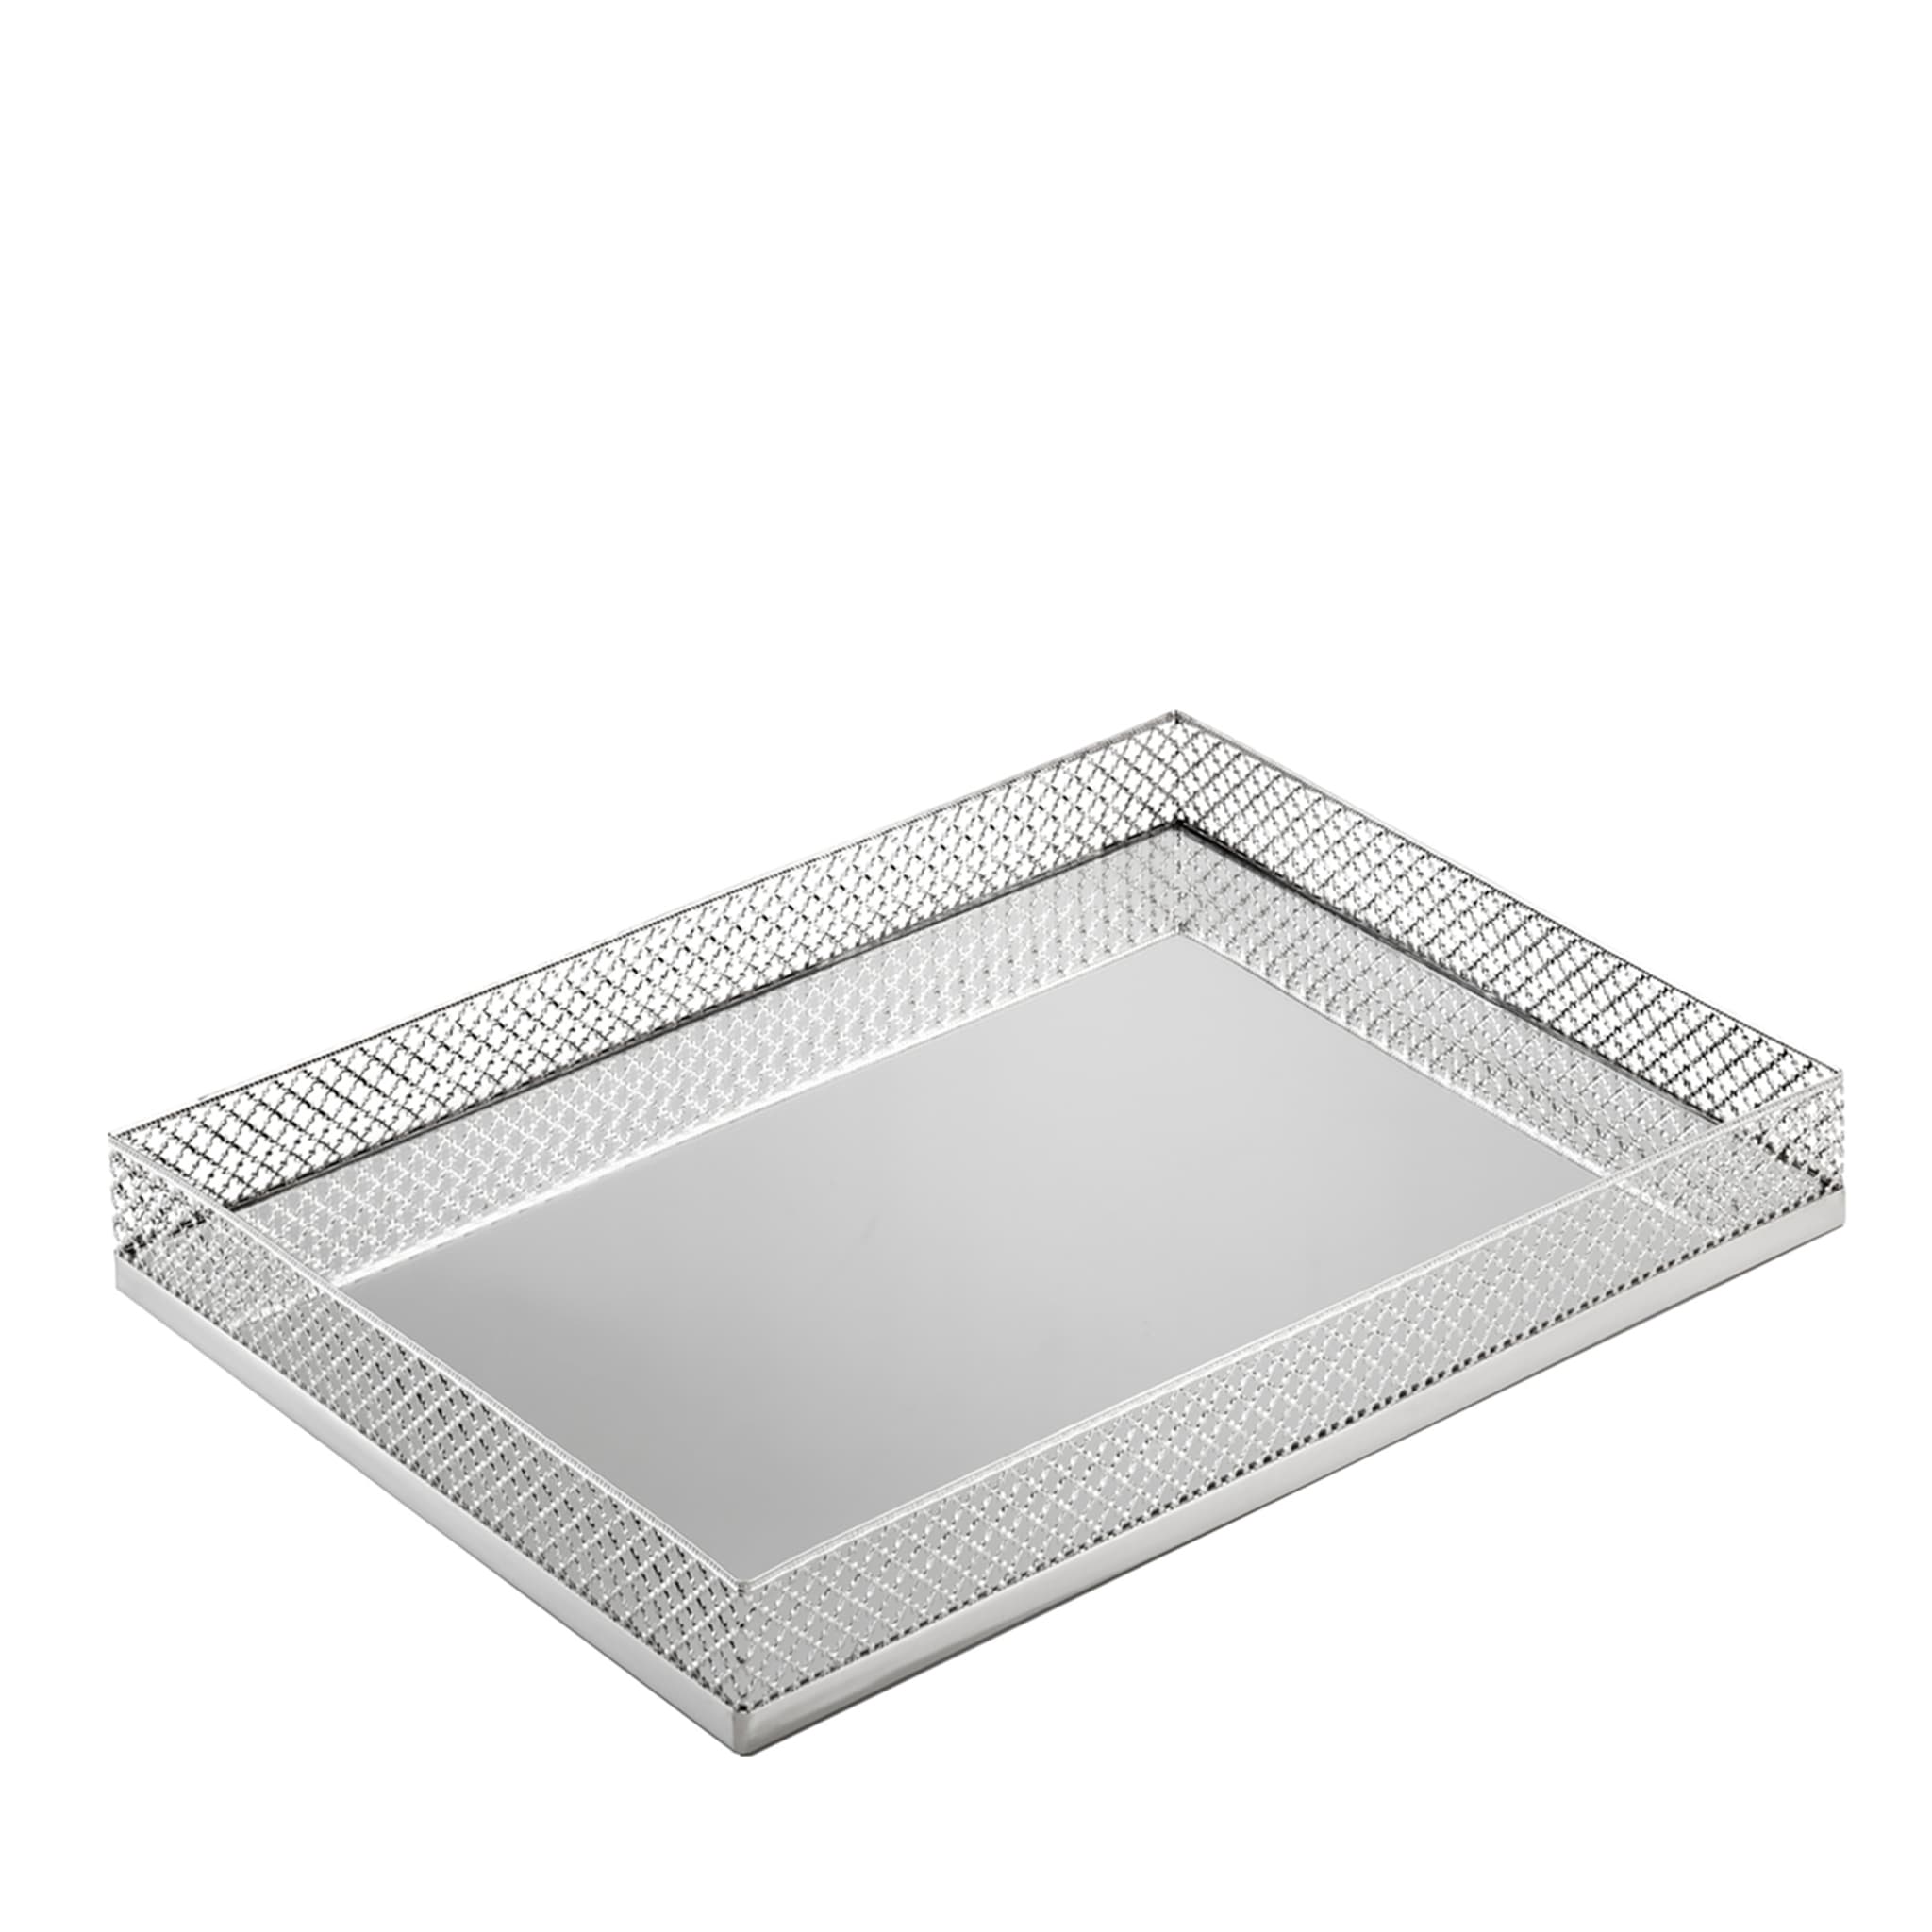 SMALL FIRENZE TRAY - SILVER - Main view